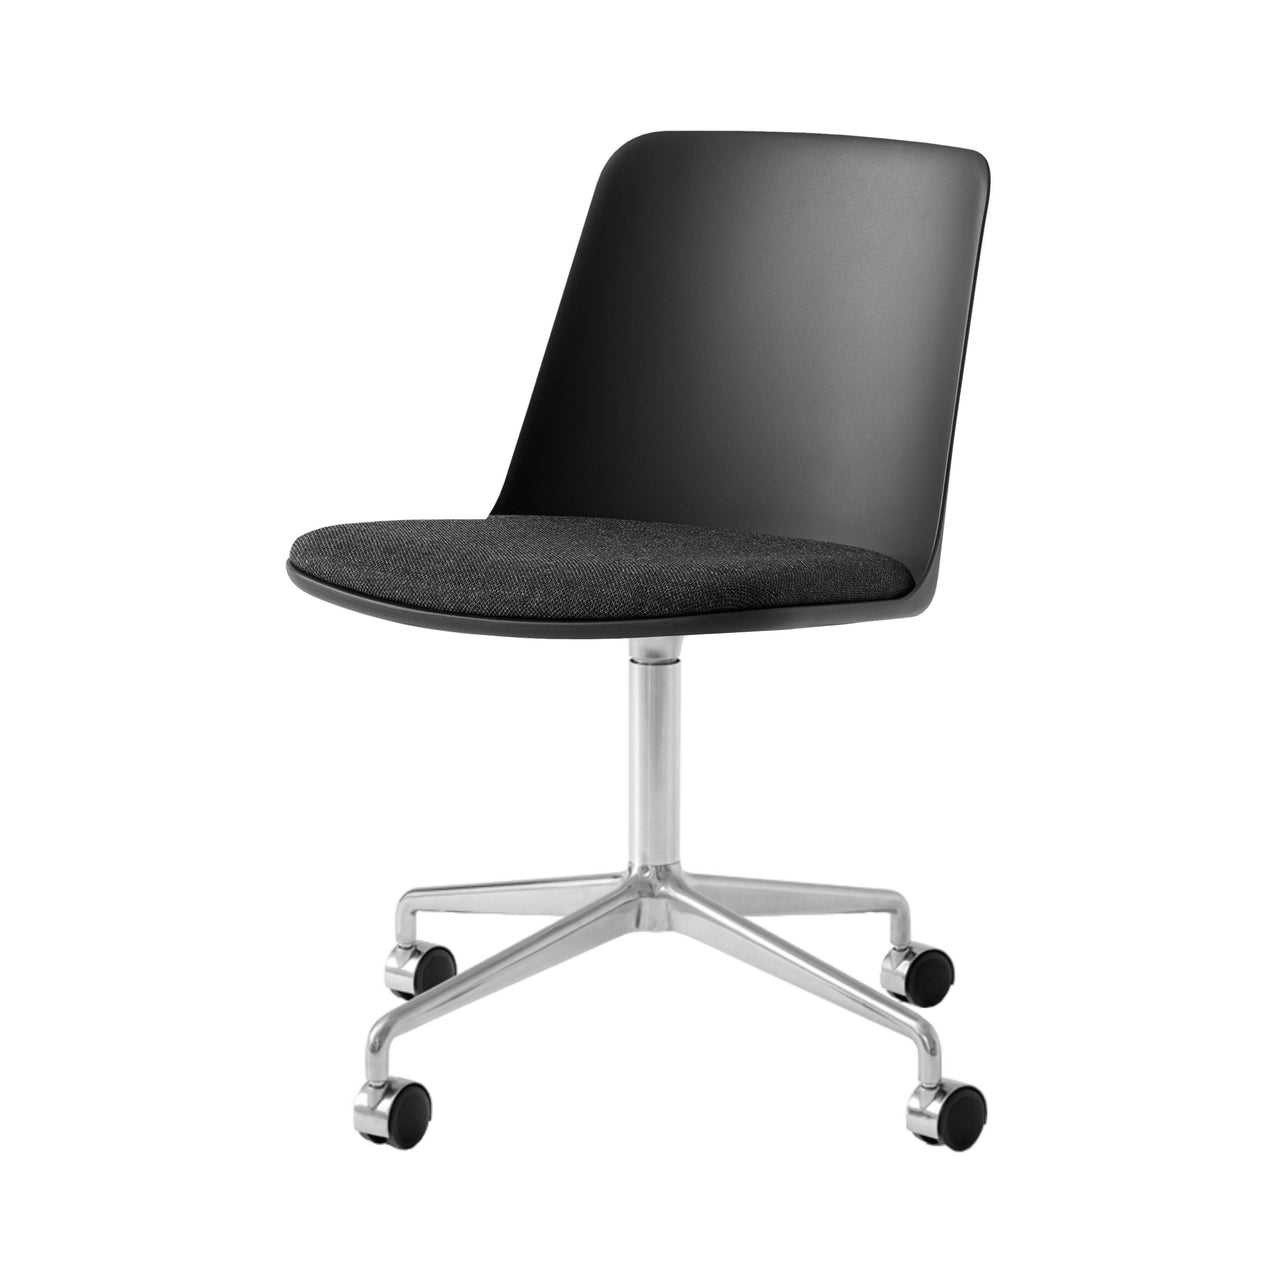 Rely Chair HW22: Polished Aluminum + Black